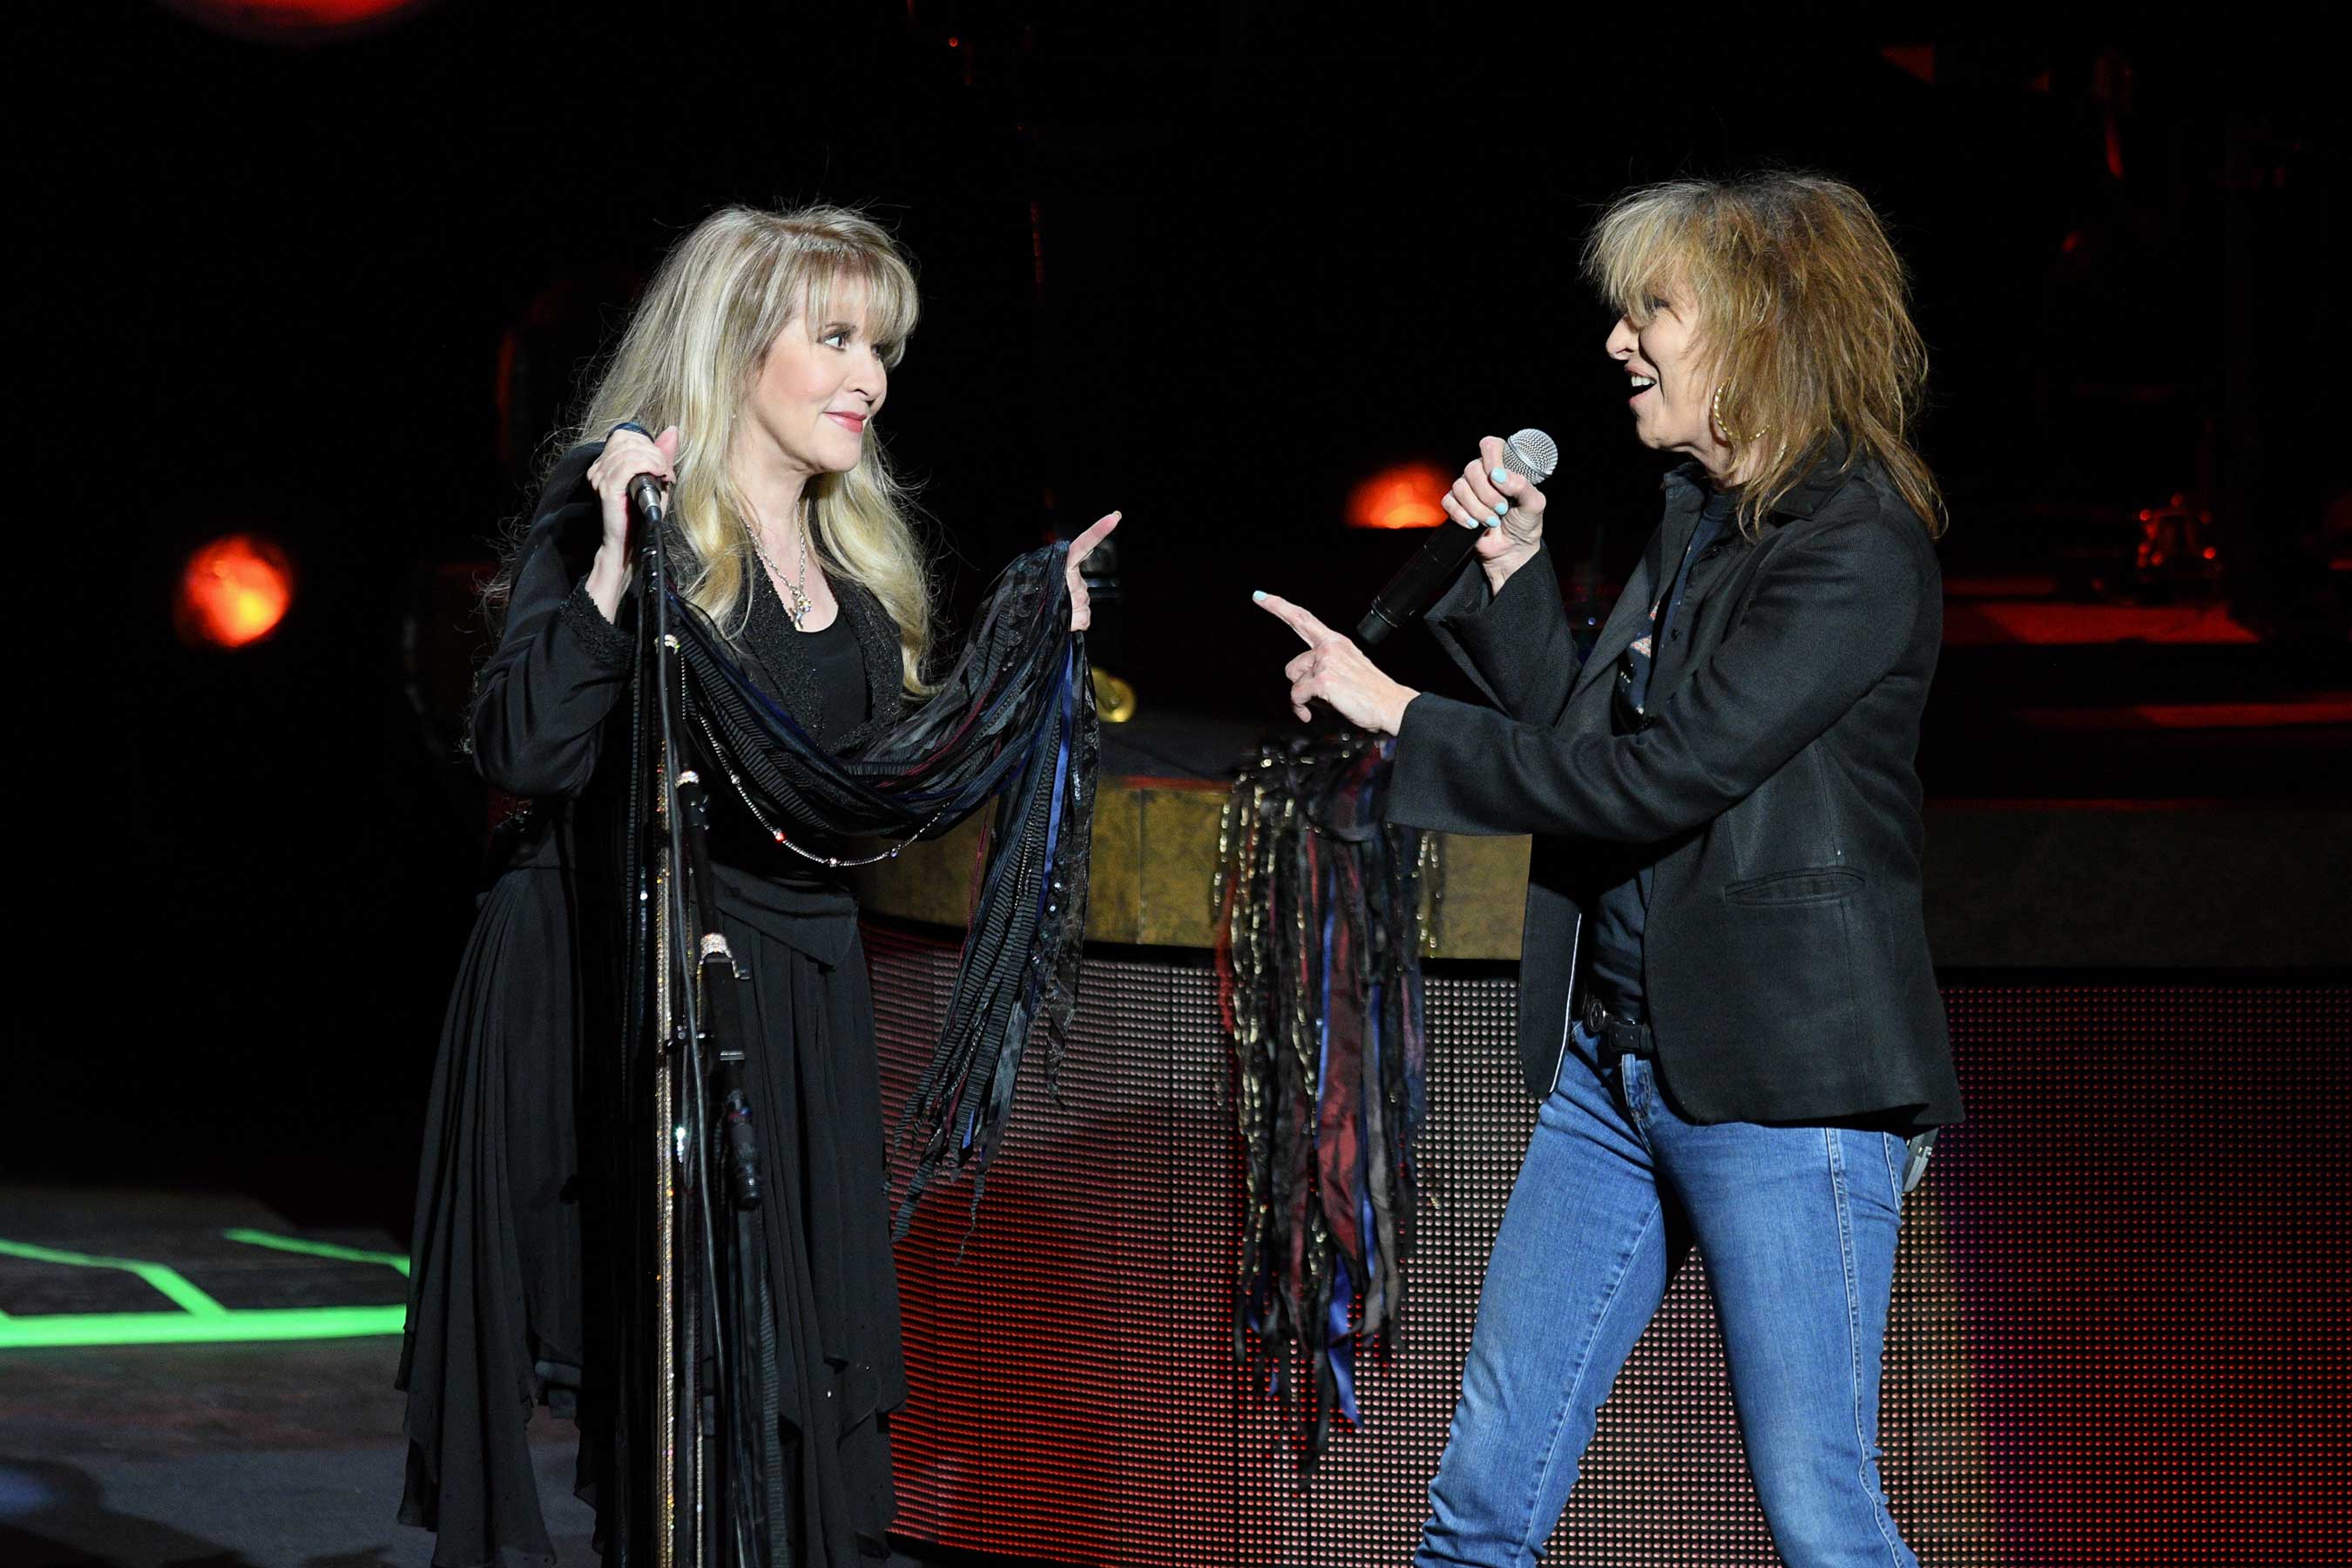 Stevie Nicks and Chrissie Hynde Perform Together at Grand Opening of Park Theater at Monte Carlo Resort and Casino in Las Vegas - Saturday, Dec. 17, 2016 - Photo by Al Powers for Park Theater